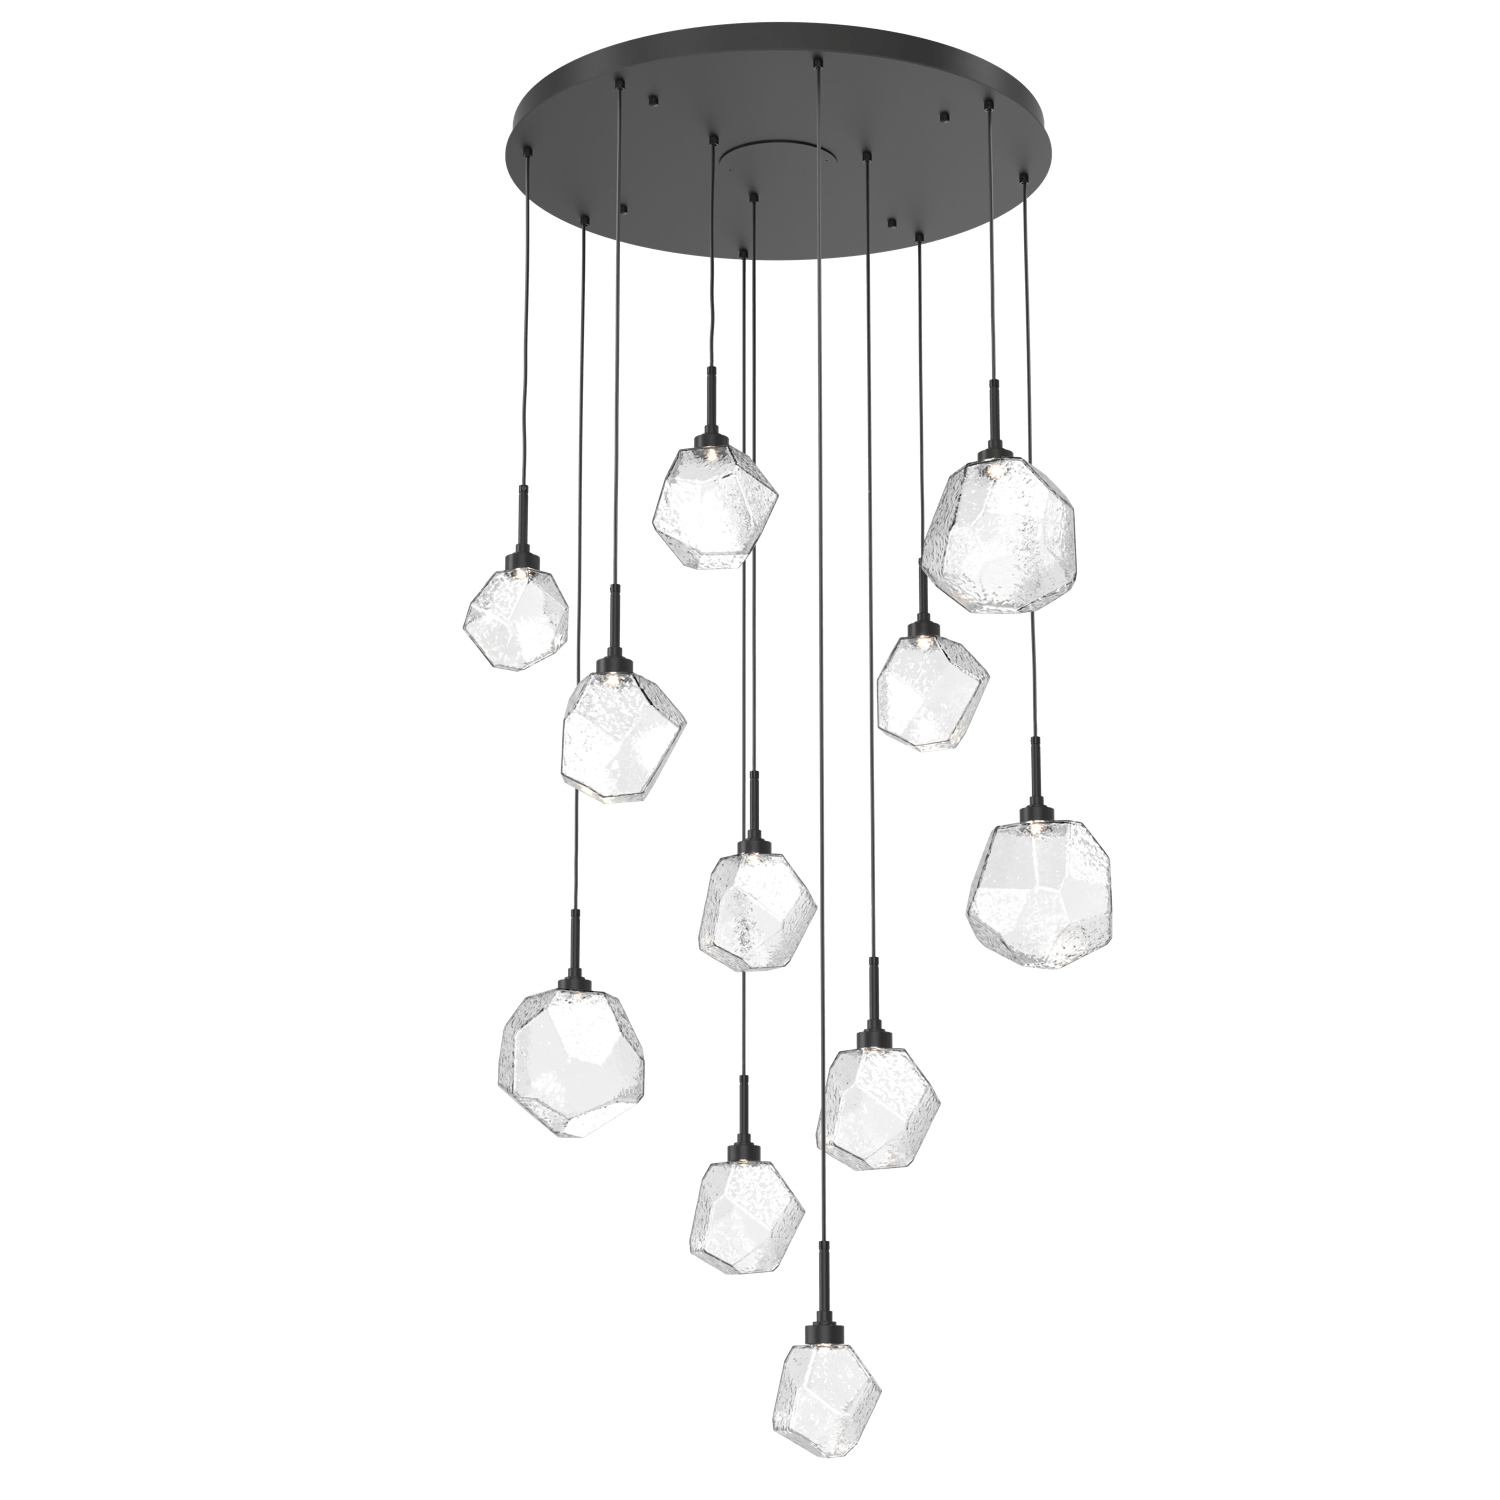 CHB0039-11-MB-C-Hammerton-Studio-Gem-11-light-round-pendant-chandelier-with-matte-black-finish-and-clear-blown-glass-shades-and-LED-lamping